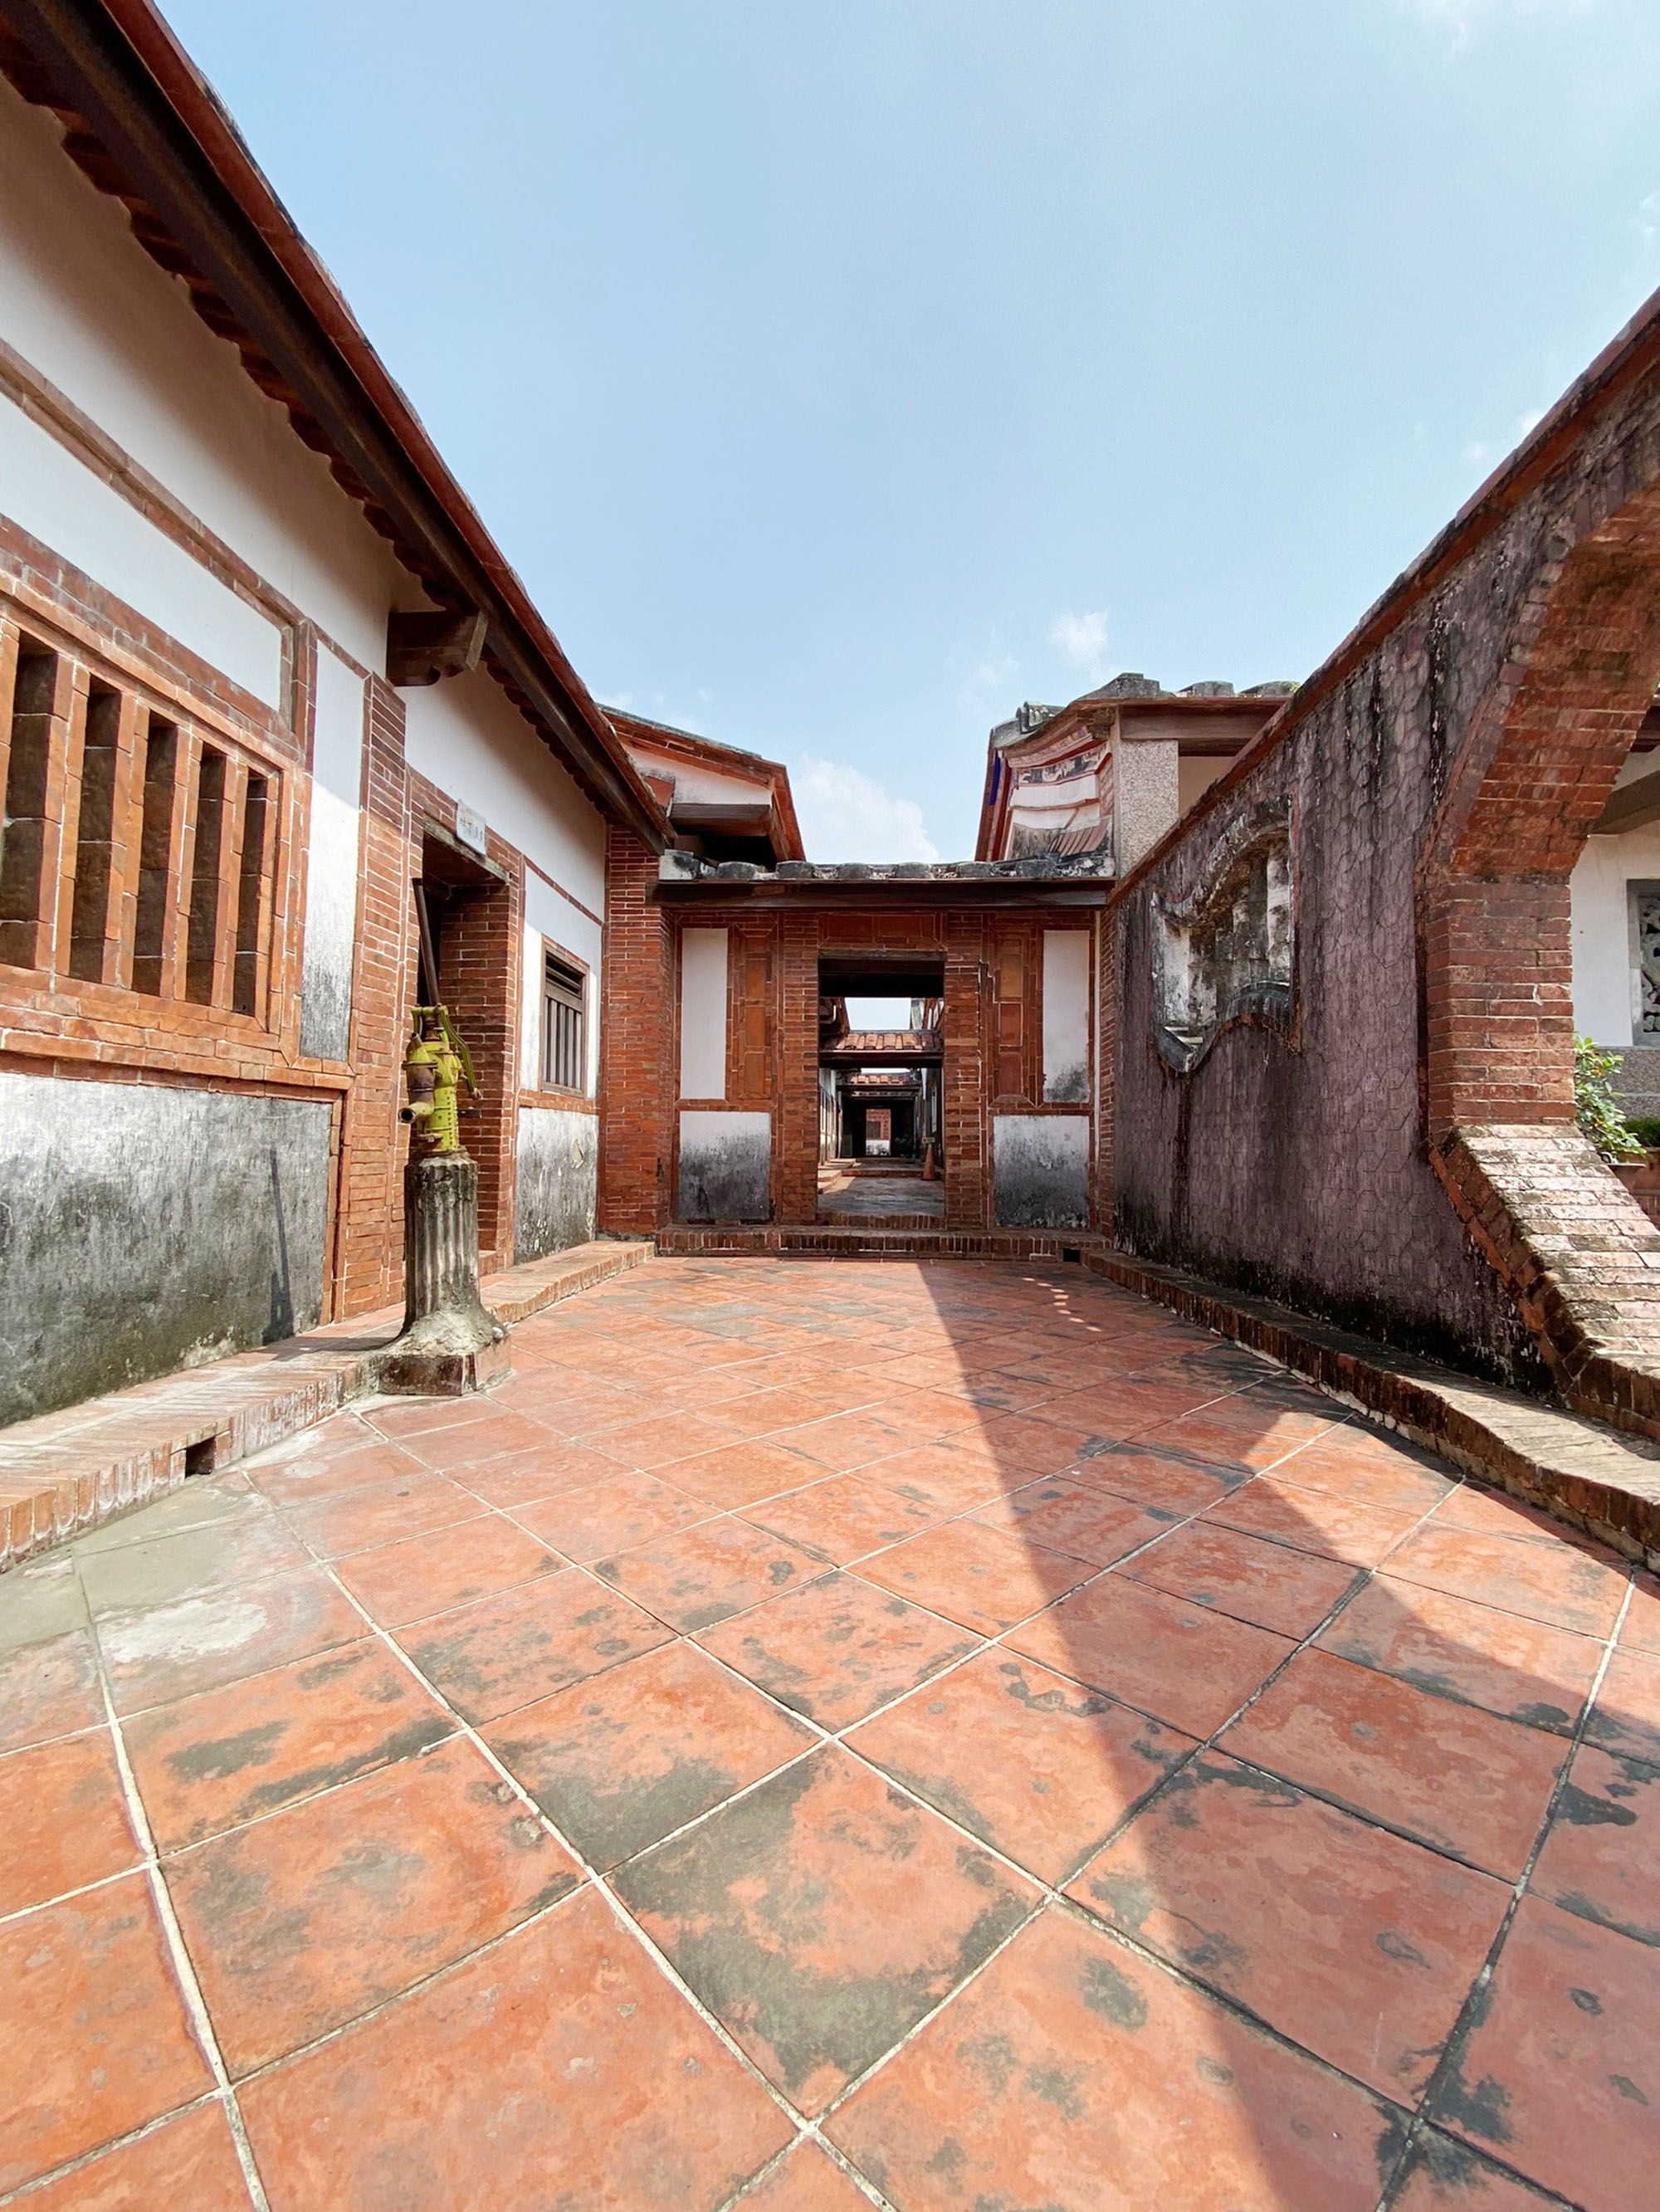 This unique Hakka mansion, the only one in Taiwan with five courtyards, covers over 4,000 square meters